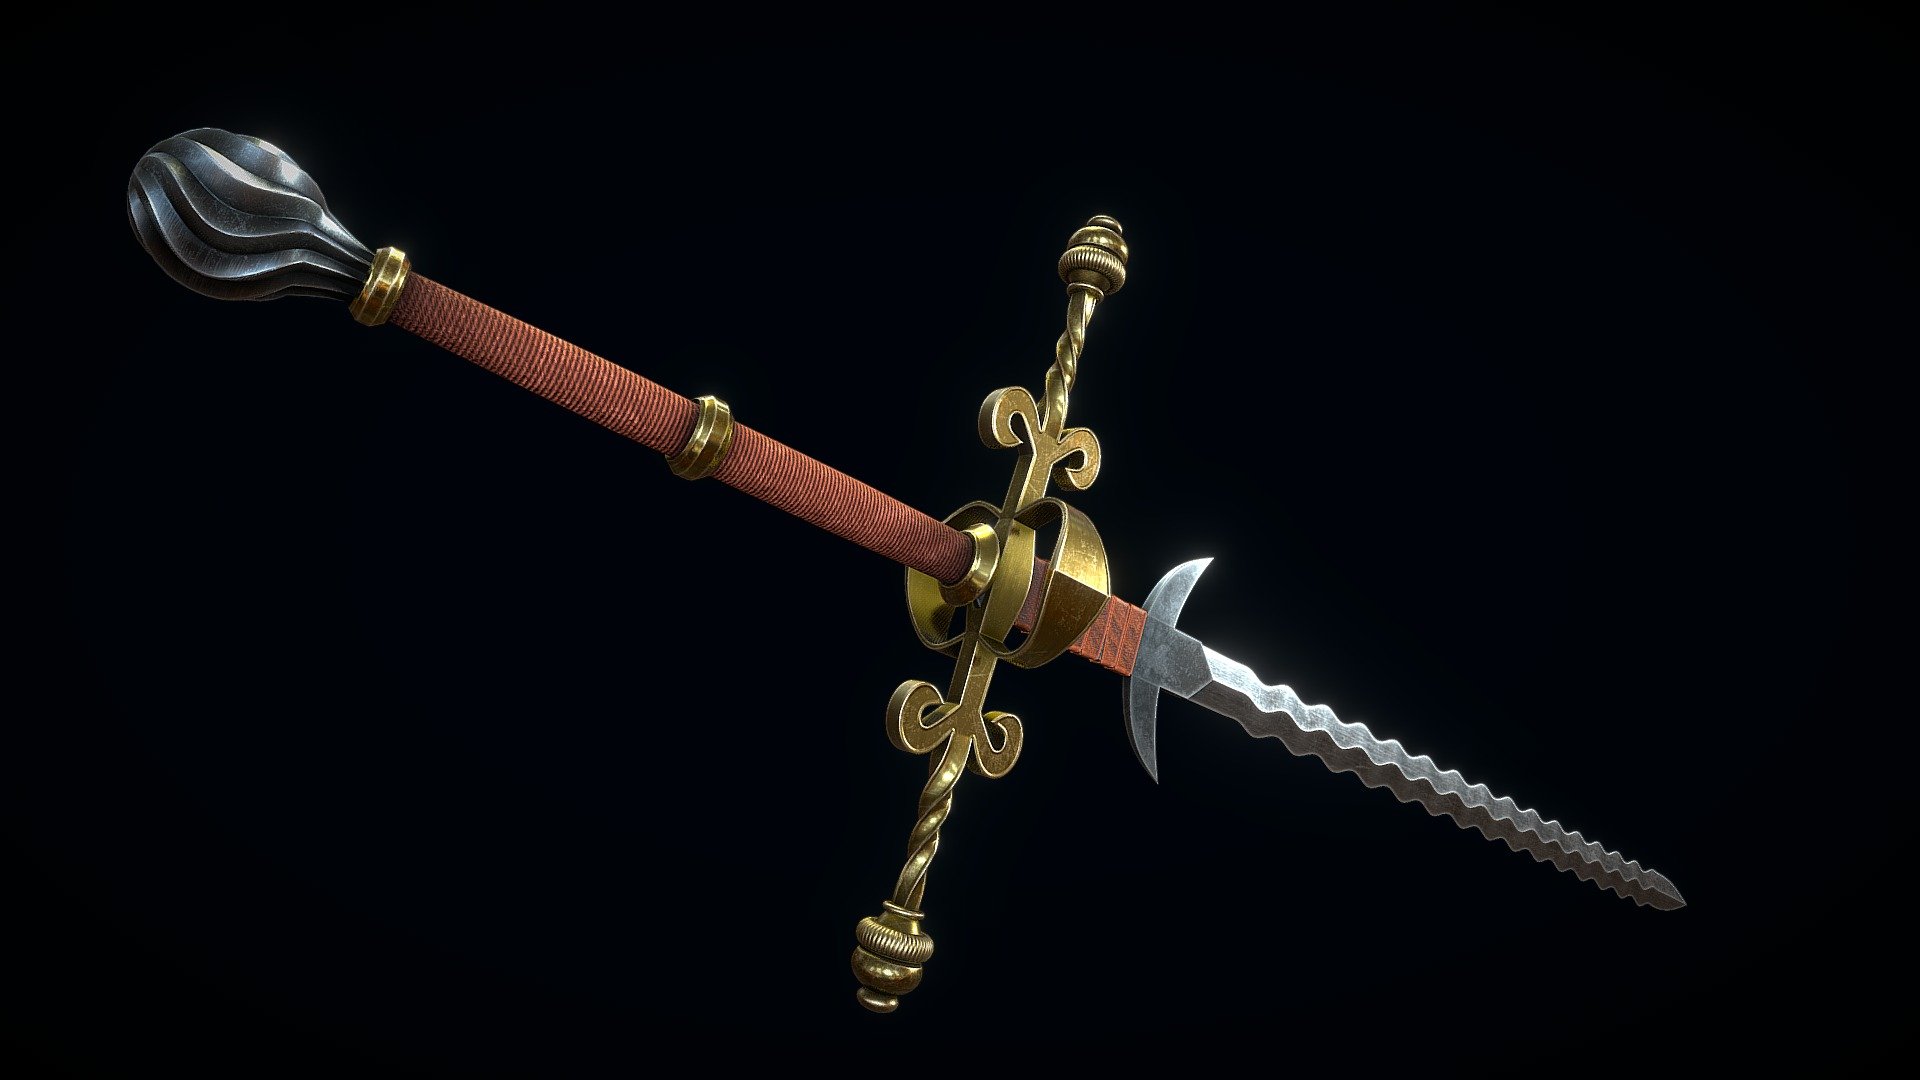 Low-poly 3D model of the Two-handed Flamberge doesn't contain any n-gons and has optimal topology. This model includes 2K textures 3d model